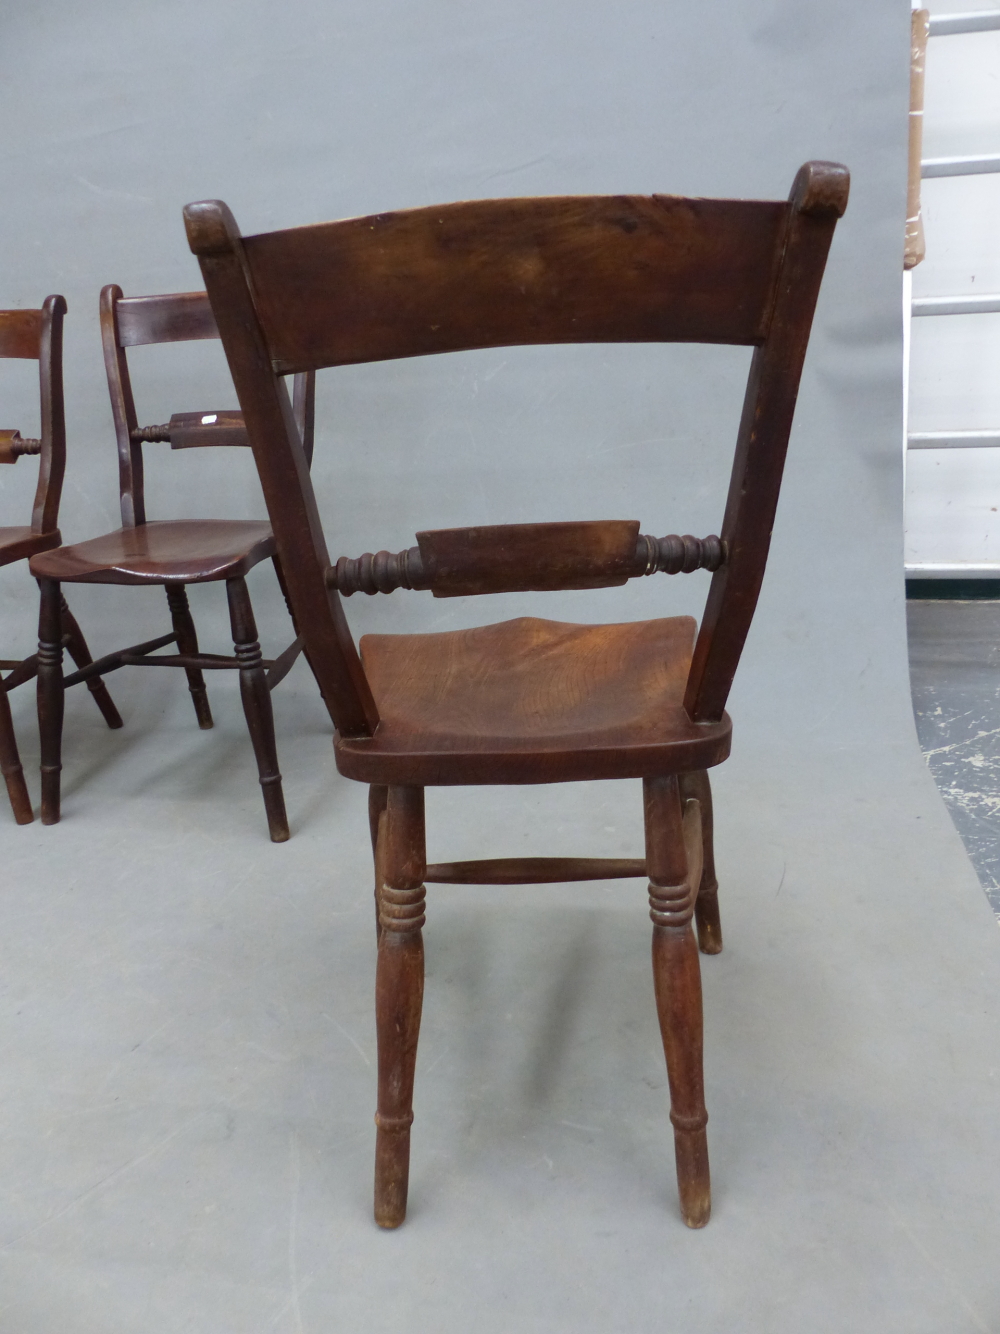 A SET OF FOUR ANTIQUE OXFORD CHAIRS WITH SADDLE SEATS AND RING TURNED BALUSTER LEGS - Image 4 of 7